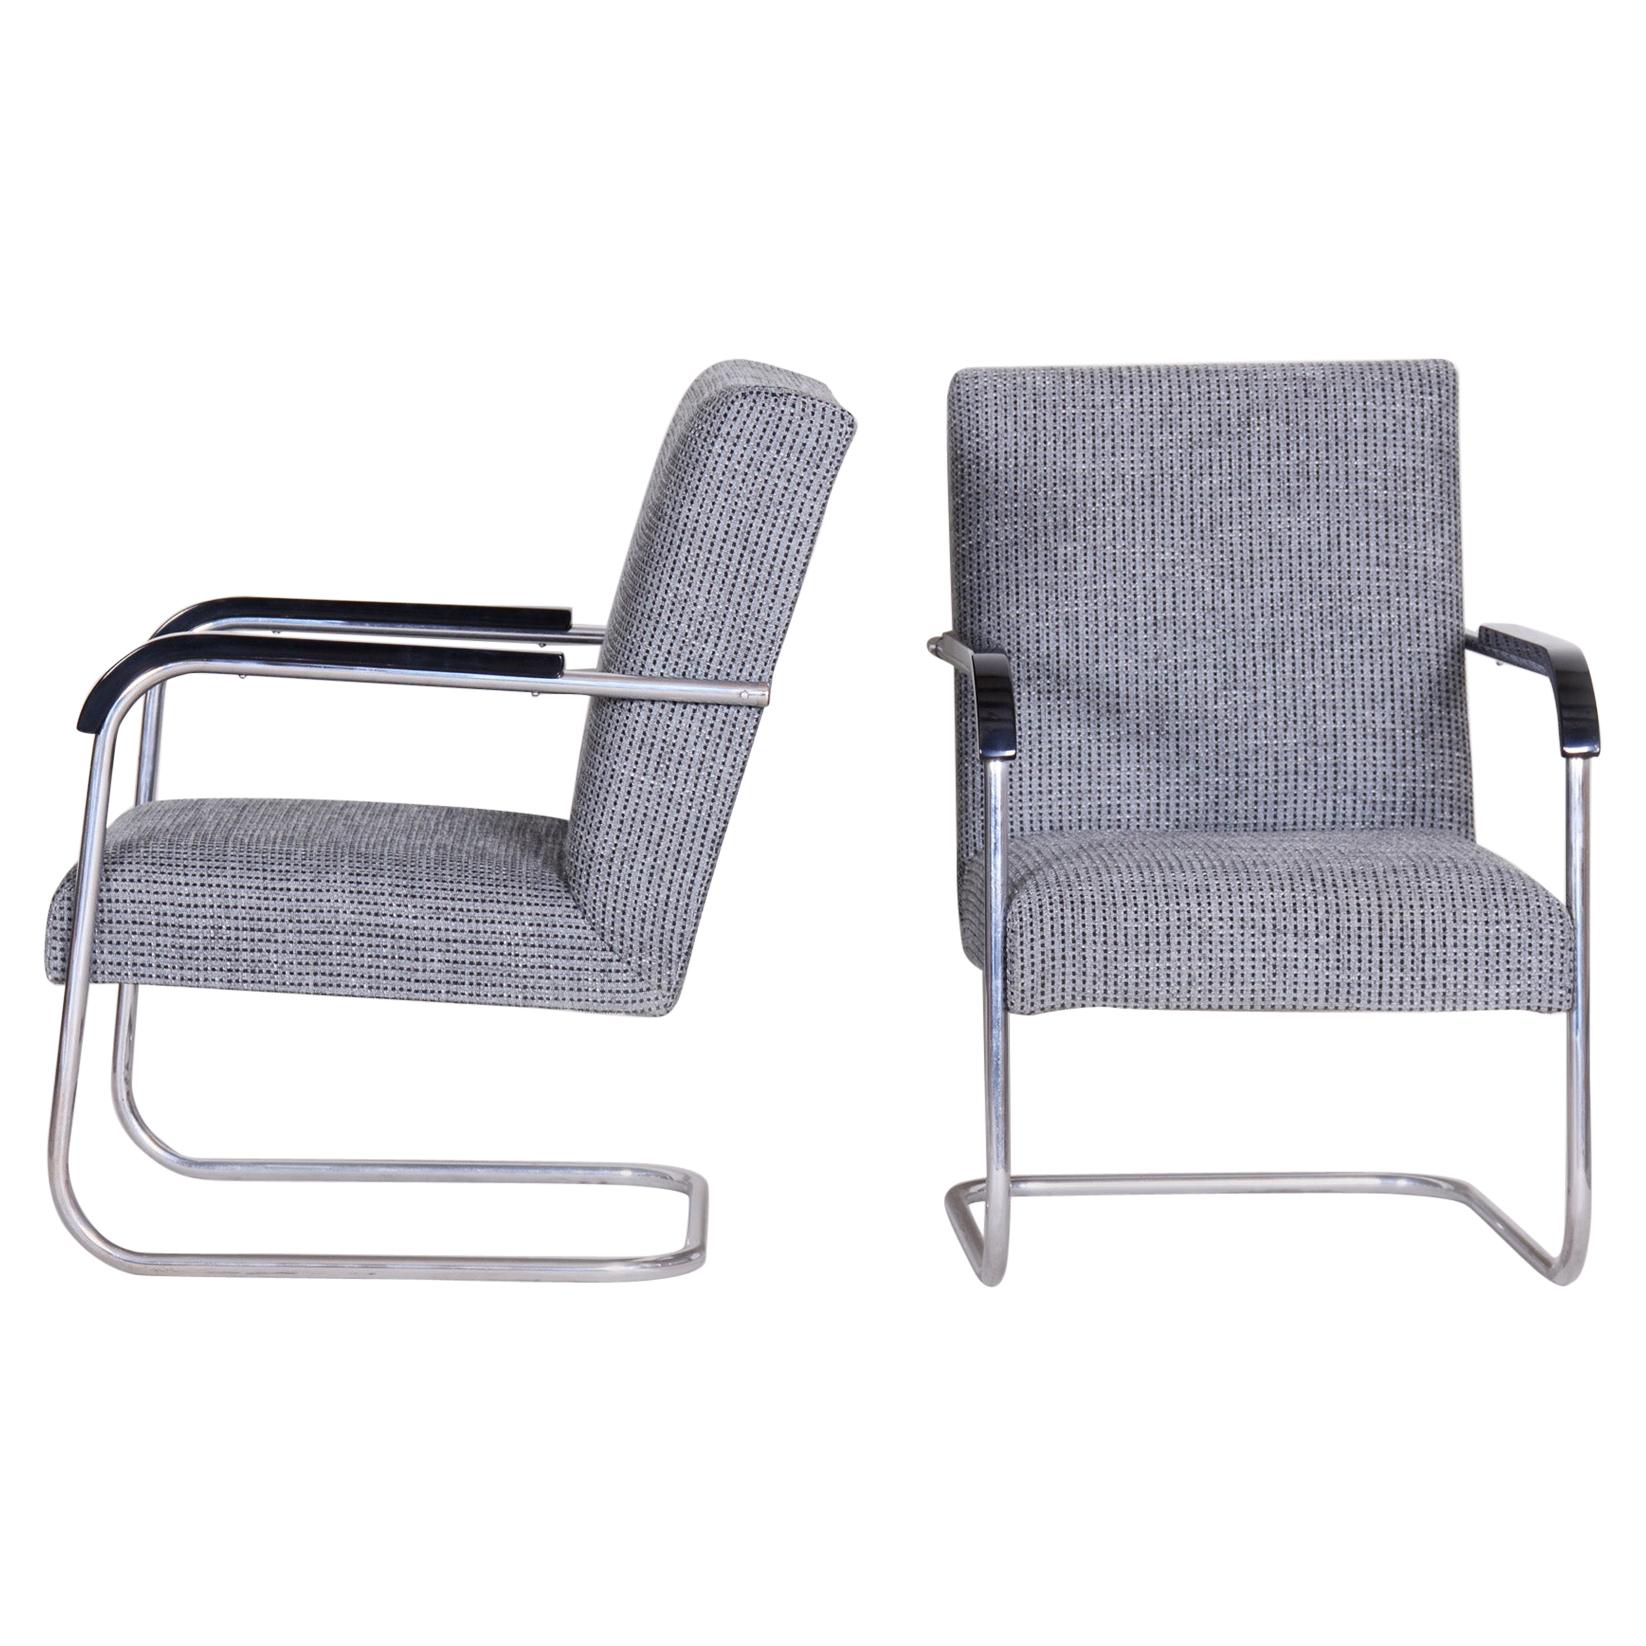 Pair of Restored Tubular Thonet Armchairs by Anton Lorenz, New Upholstery, 1930s